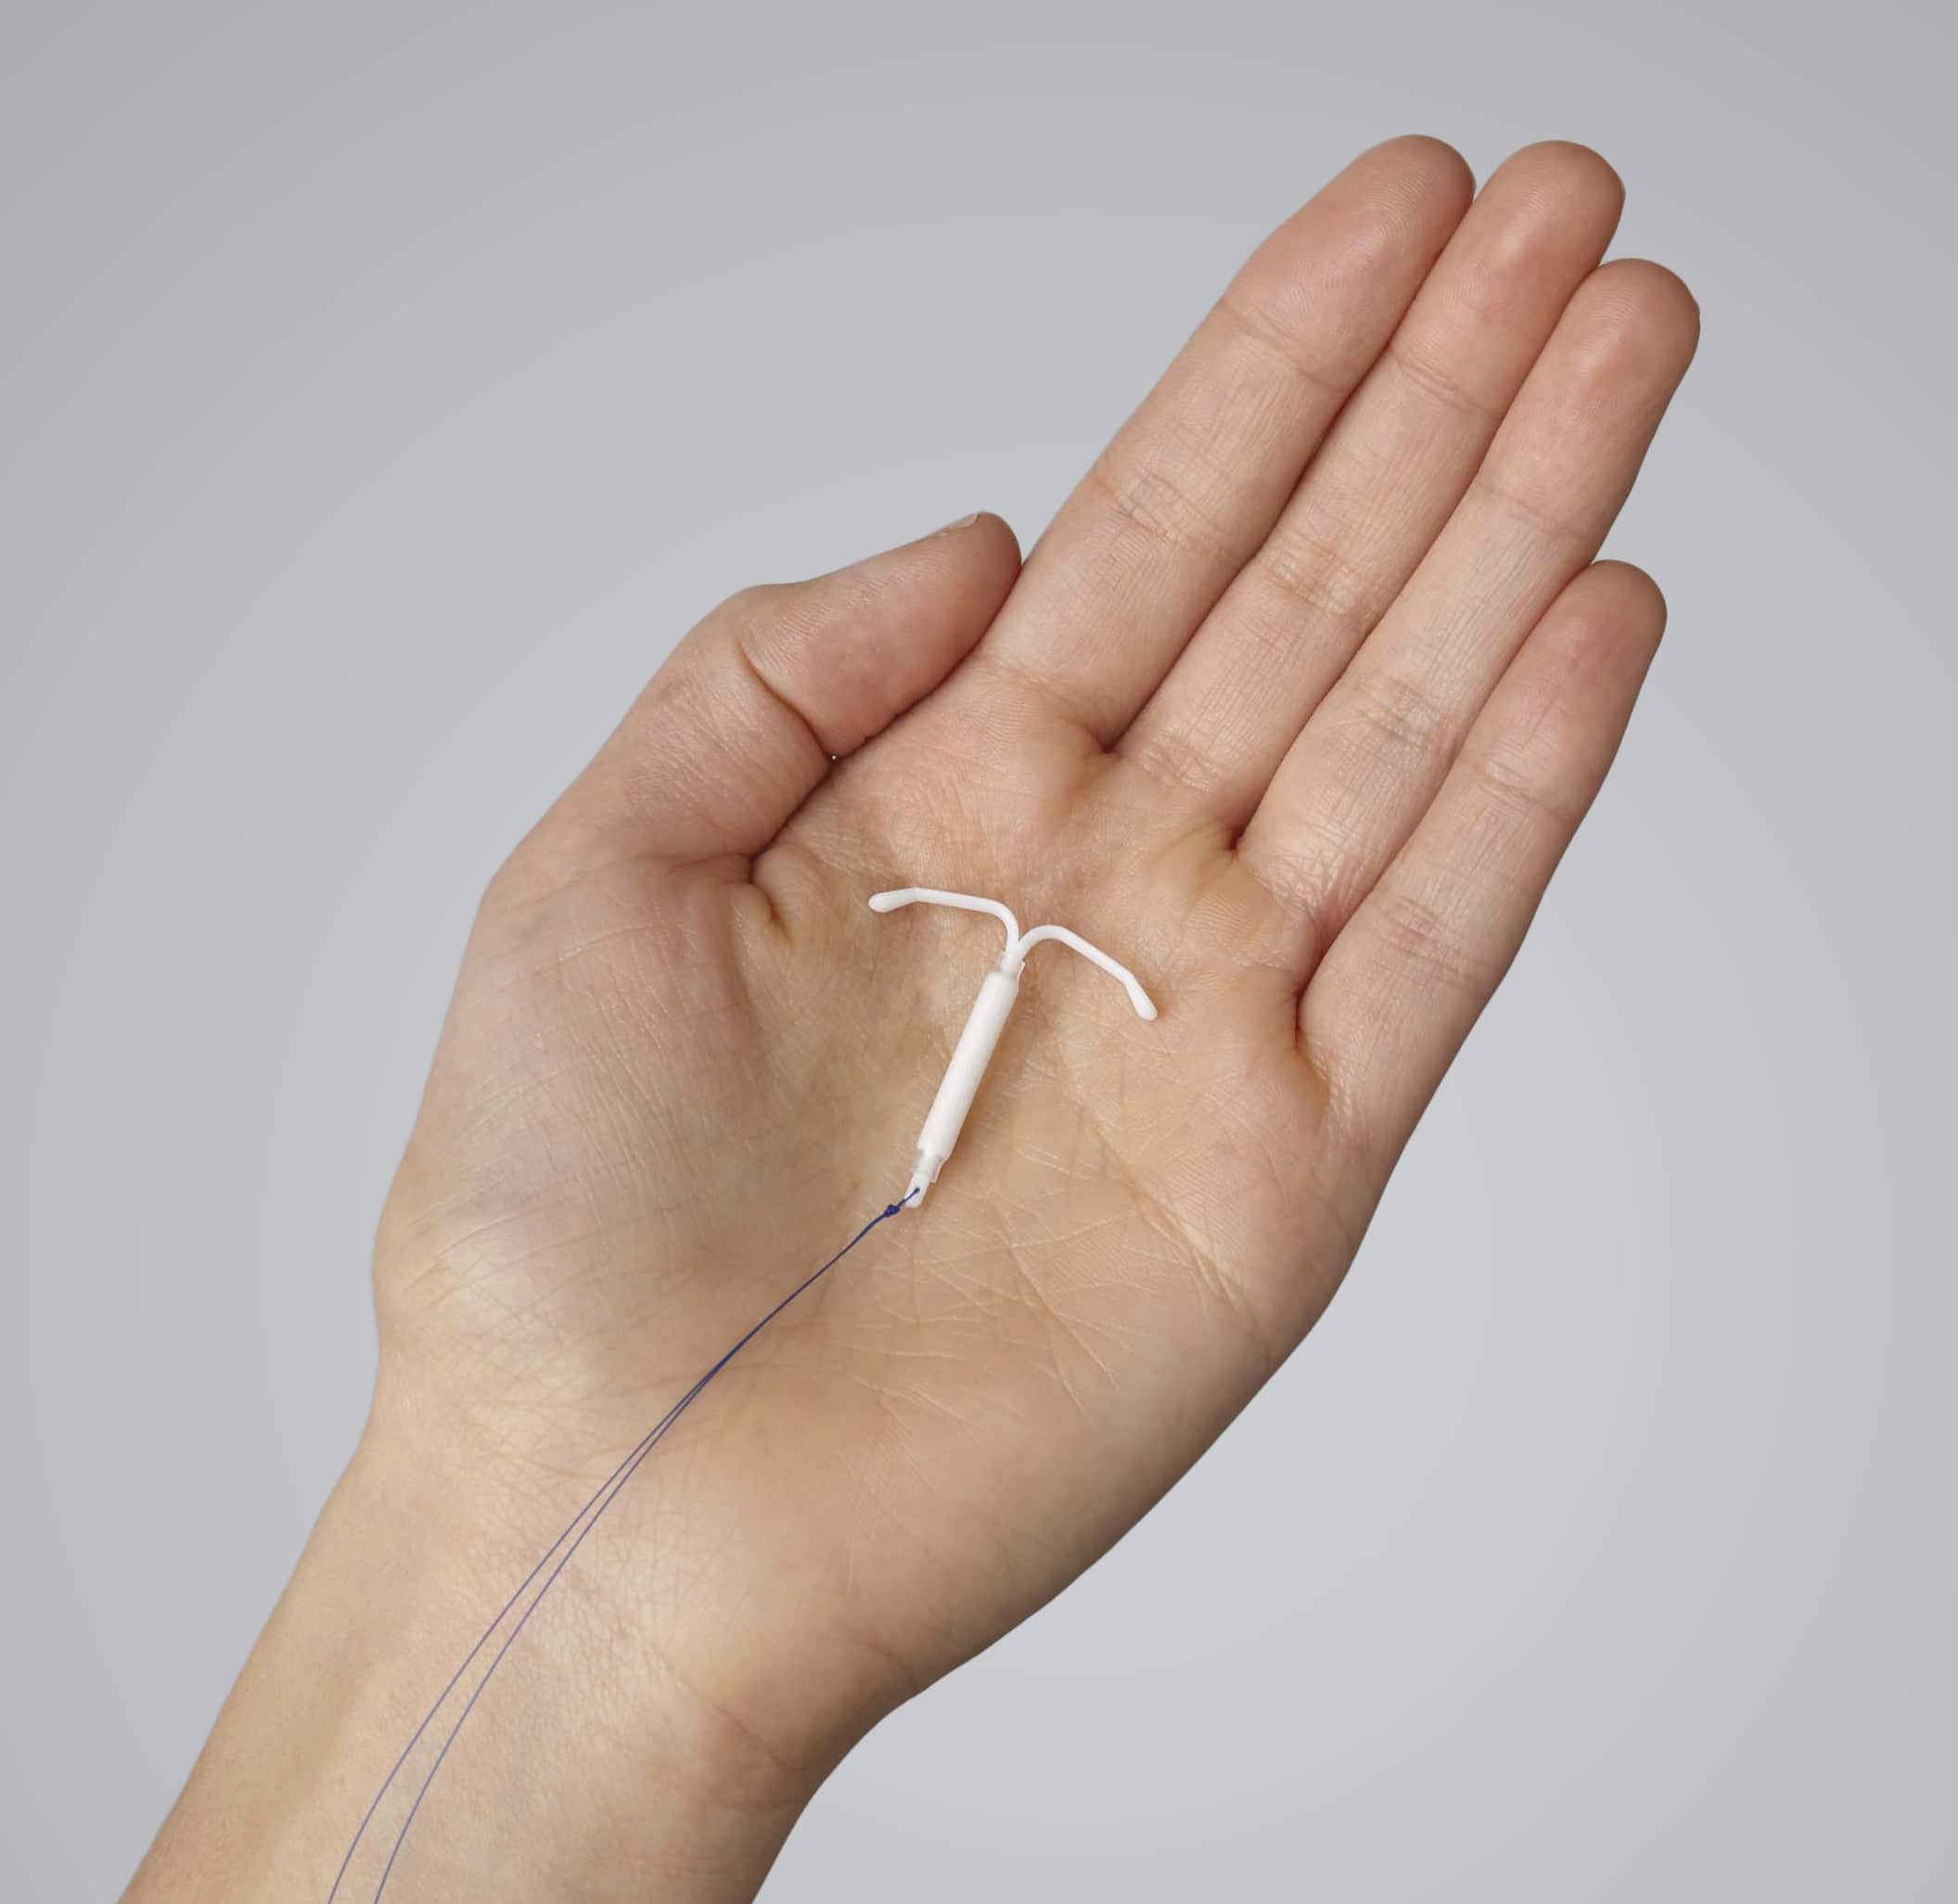 Hormonal IUDs have no effect on lactation or breastfeeding